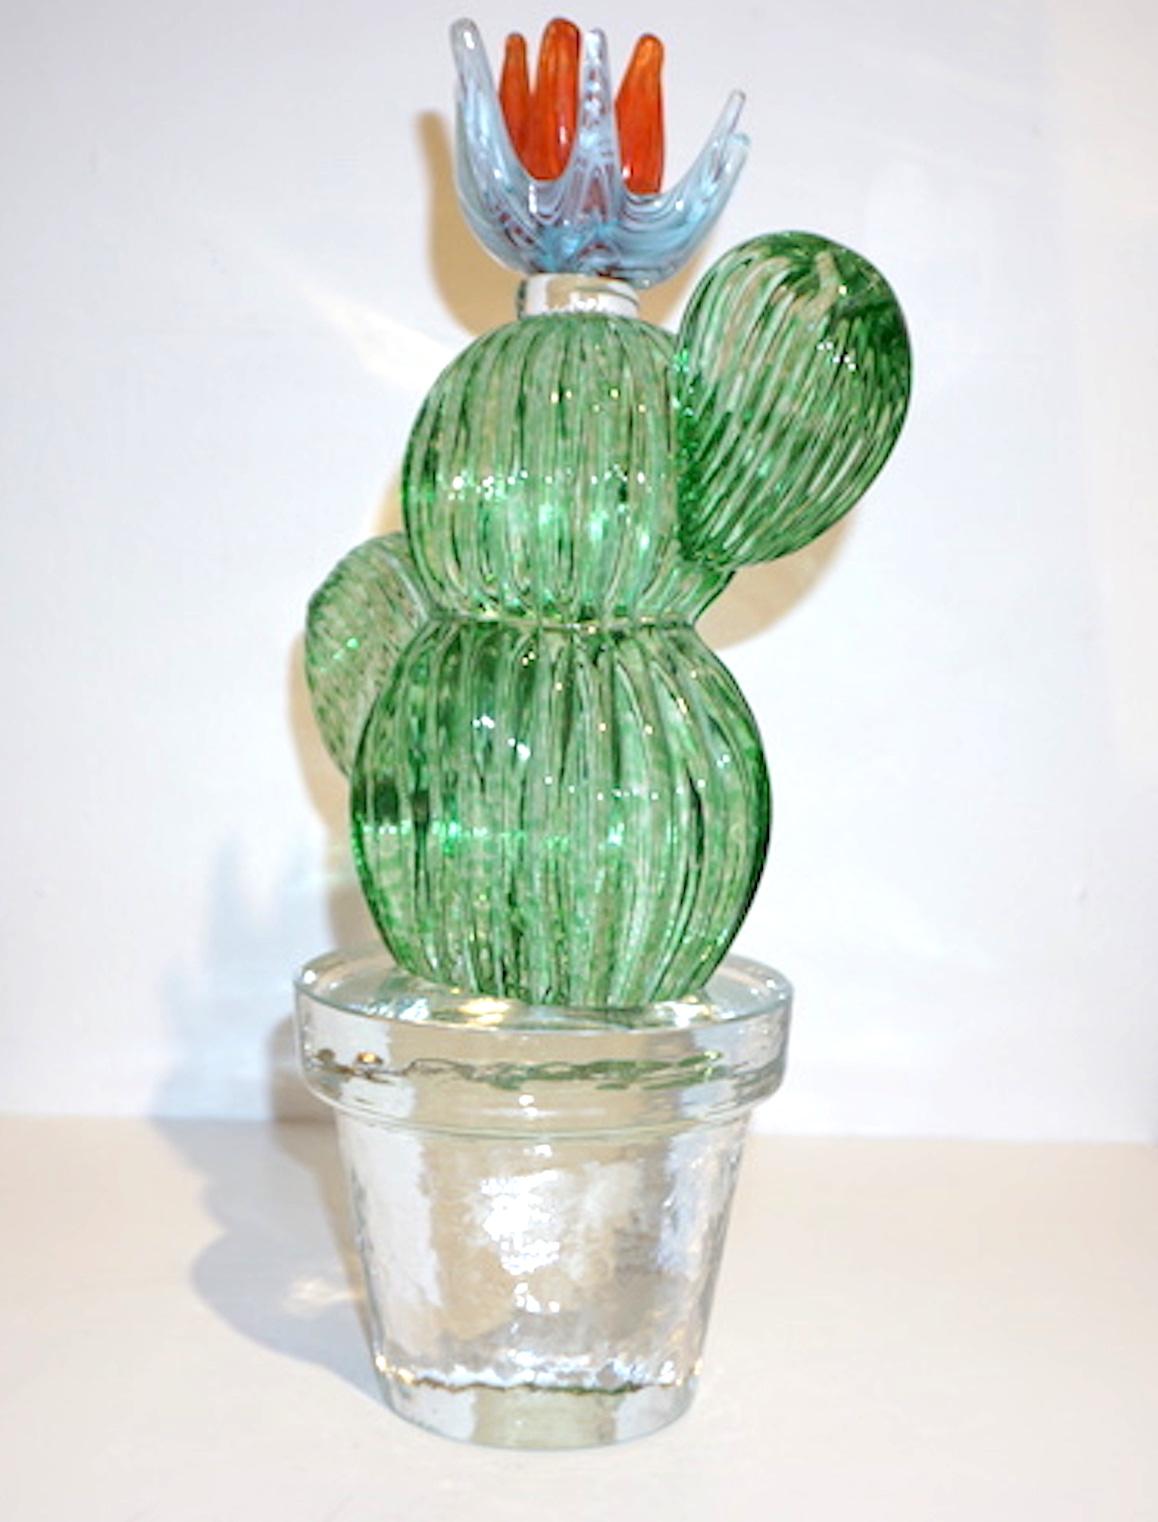 Organic Modern 1990s Marta Marzotto Vintage Murano Glass Green Cactus Plant & Blue Coral Flower